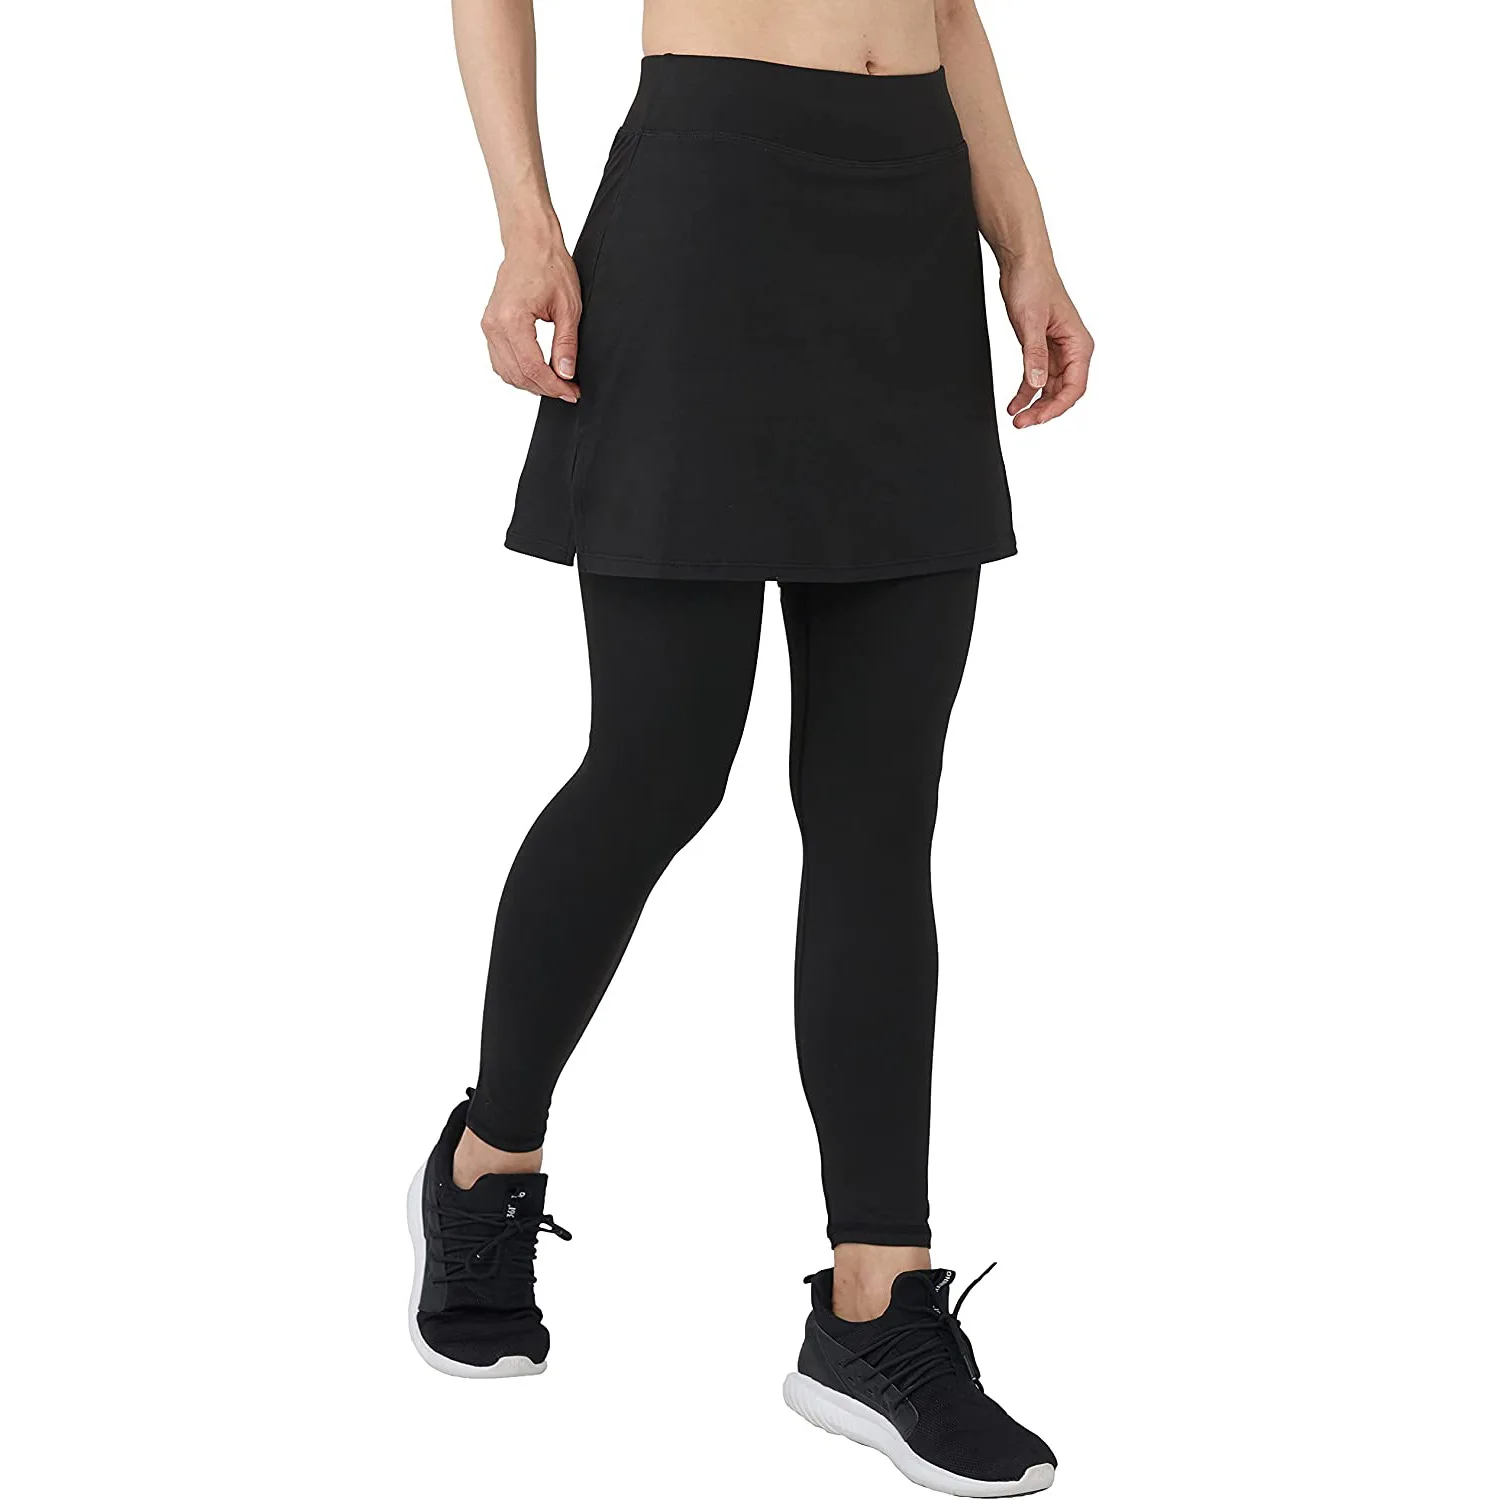 YIYI New Design Quick Dry Breathable Tennis Leggings With Pockets High Waist Golf Women Pants Athletic Skirts With Leggings